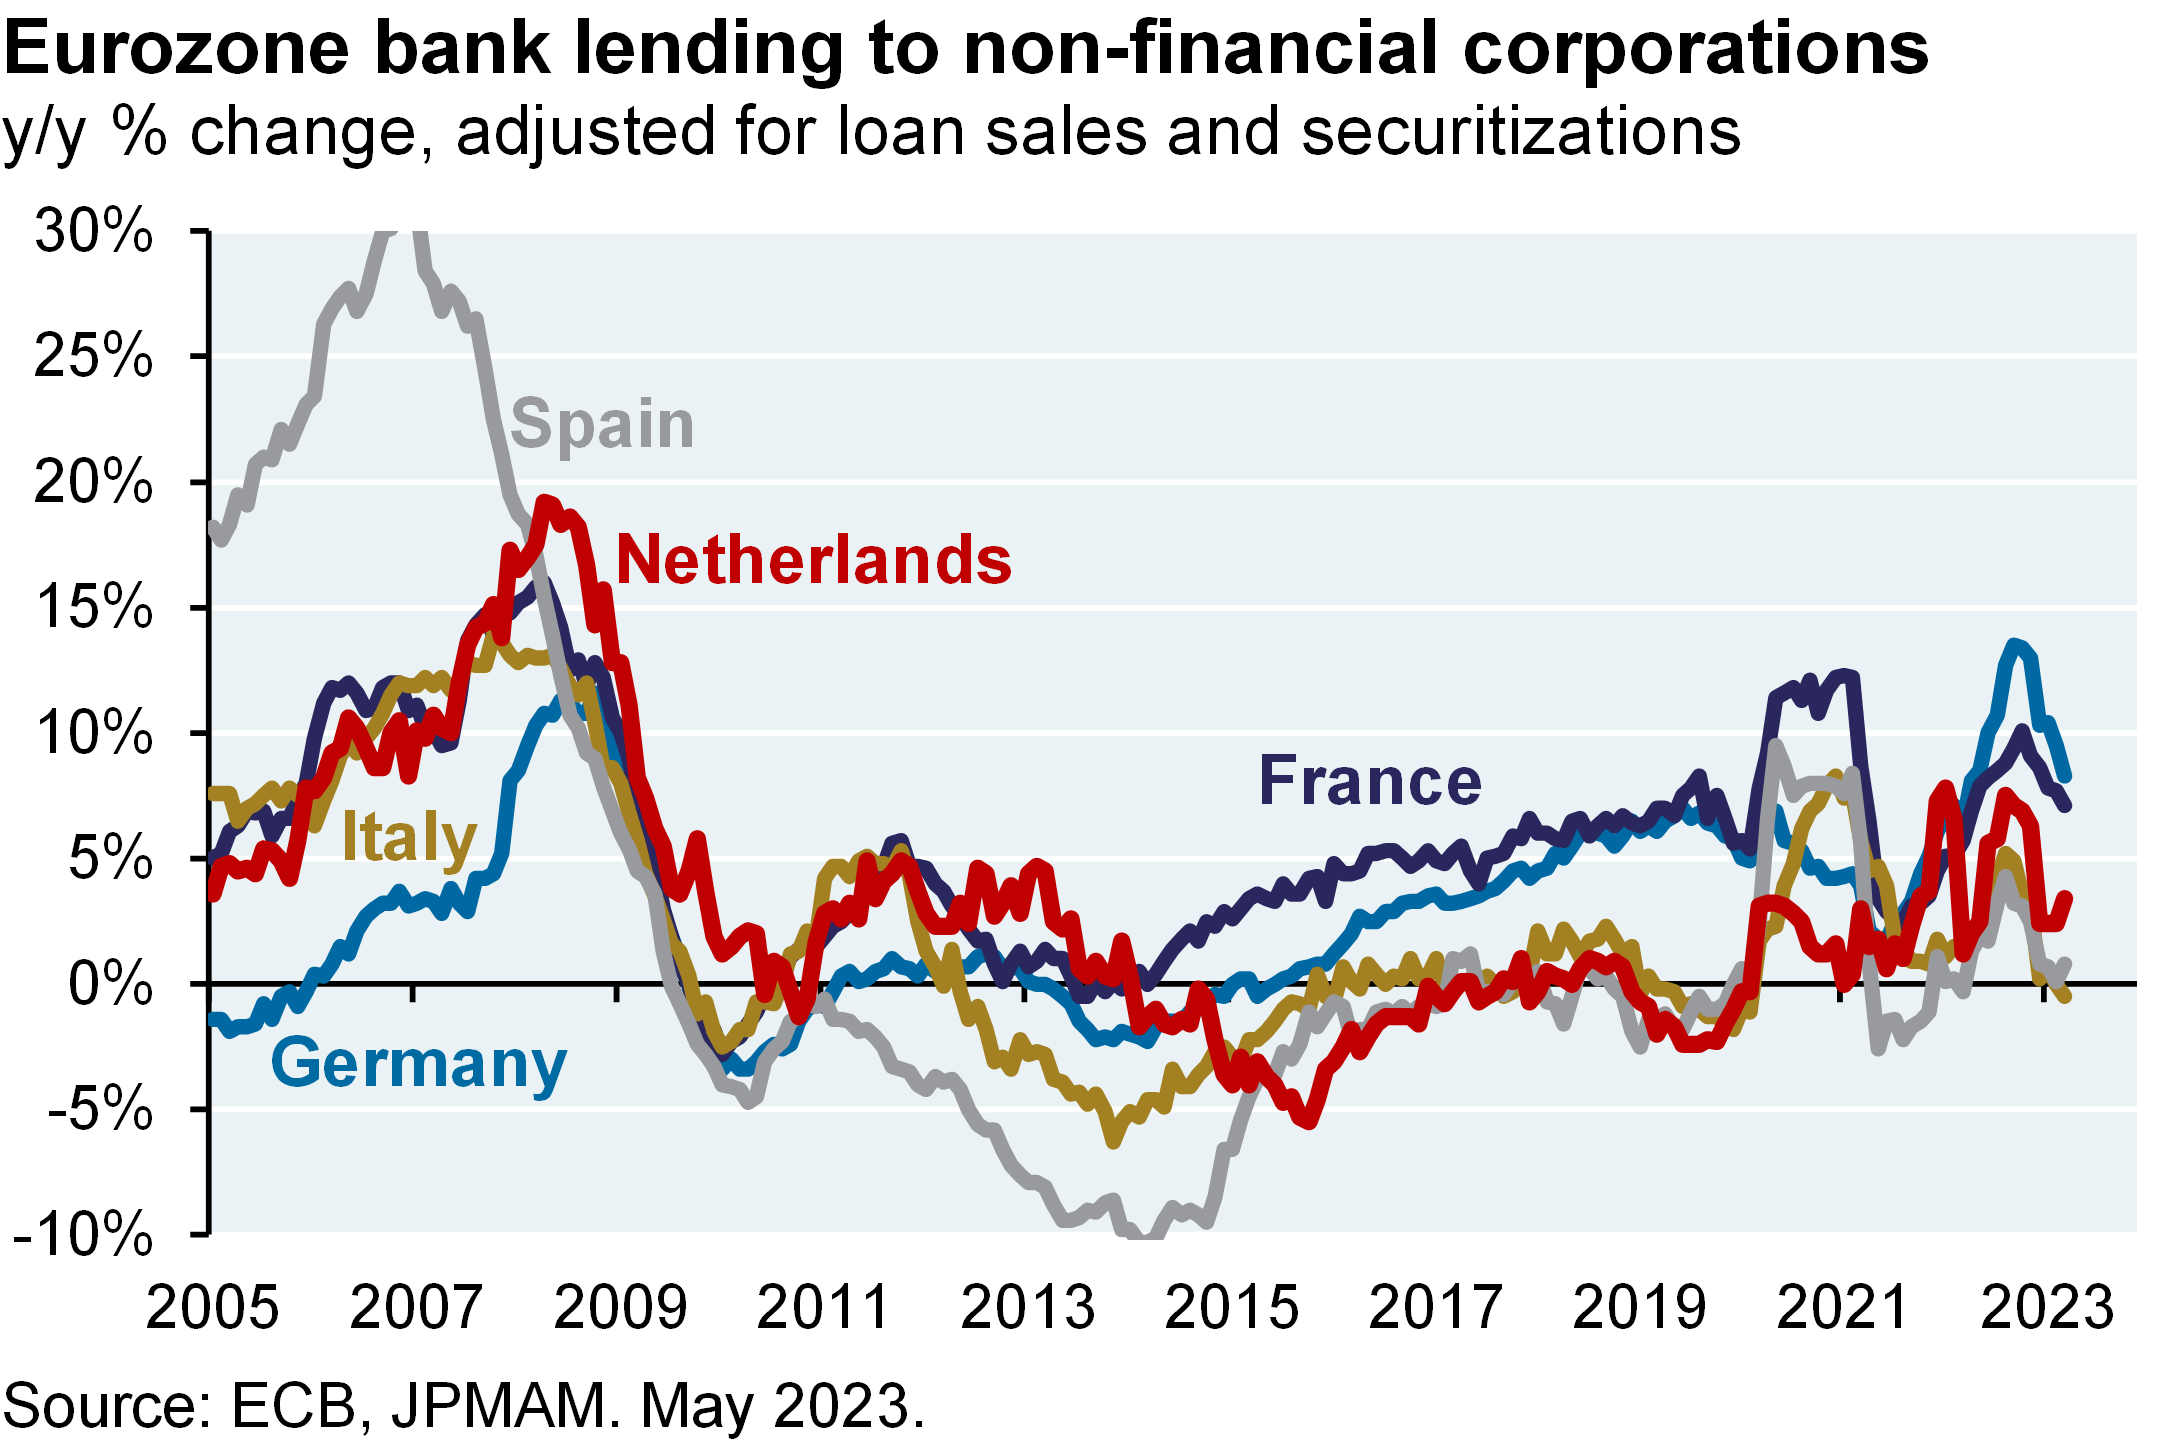 Line chart shows bank lending to non-financial corporations as a year-over-year change for Spain, Italy, Germany, France, and the Netherlands (since 2005). Each country has recovered from it’s low, but is off its peak.